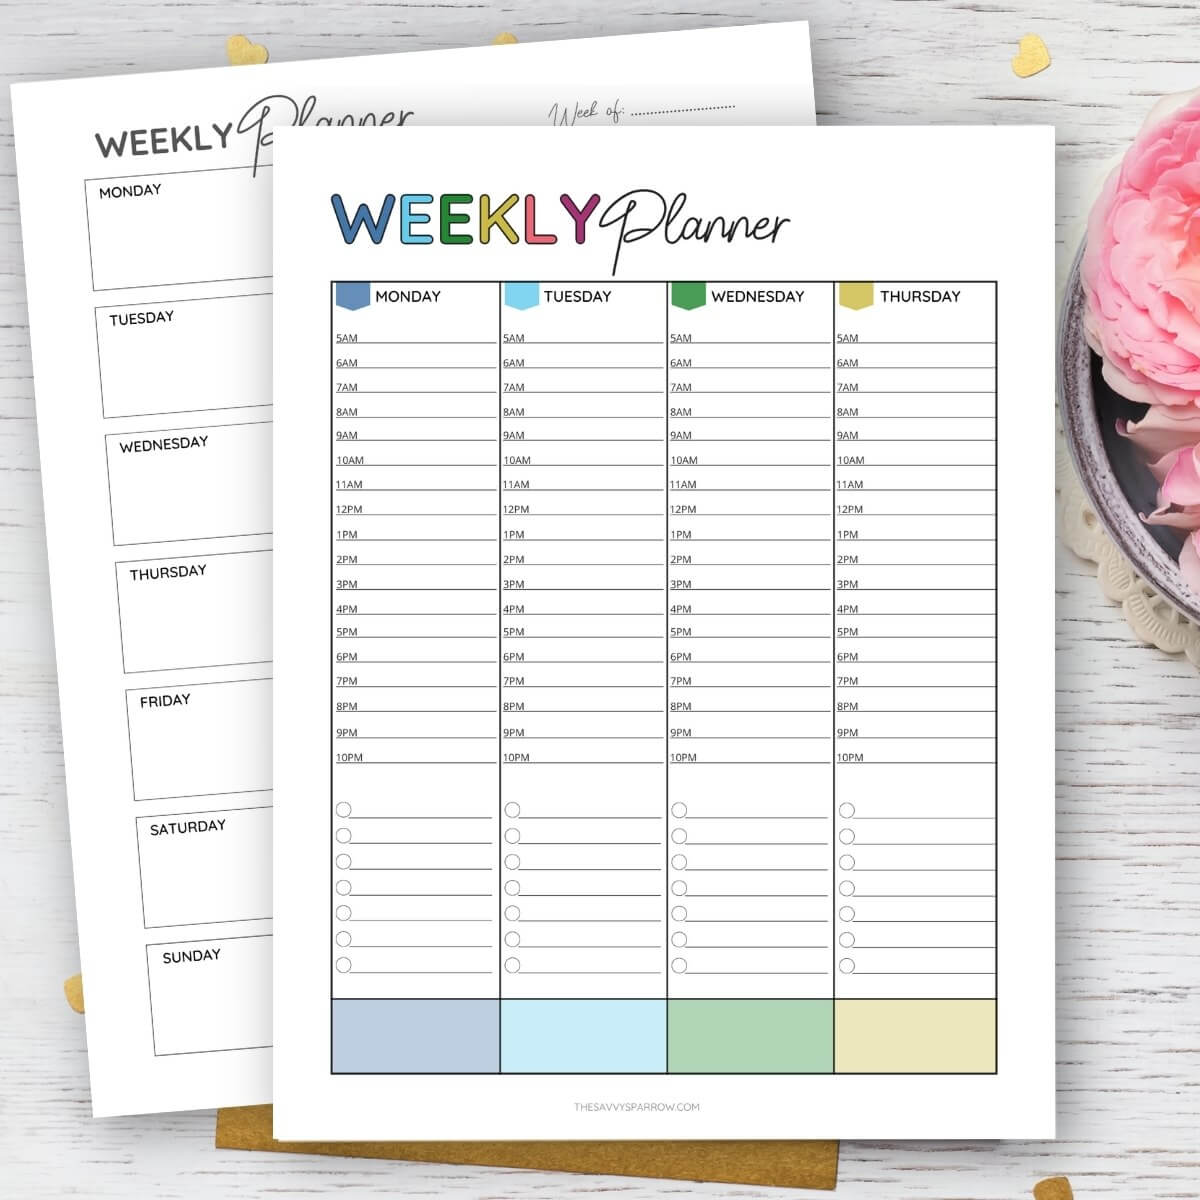 weekly-planner-printable-pdf-mail-napmexico-mx